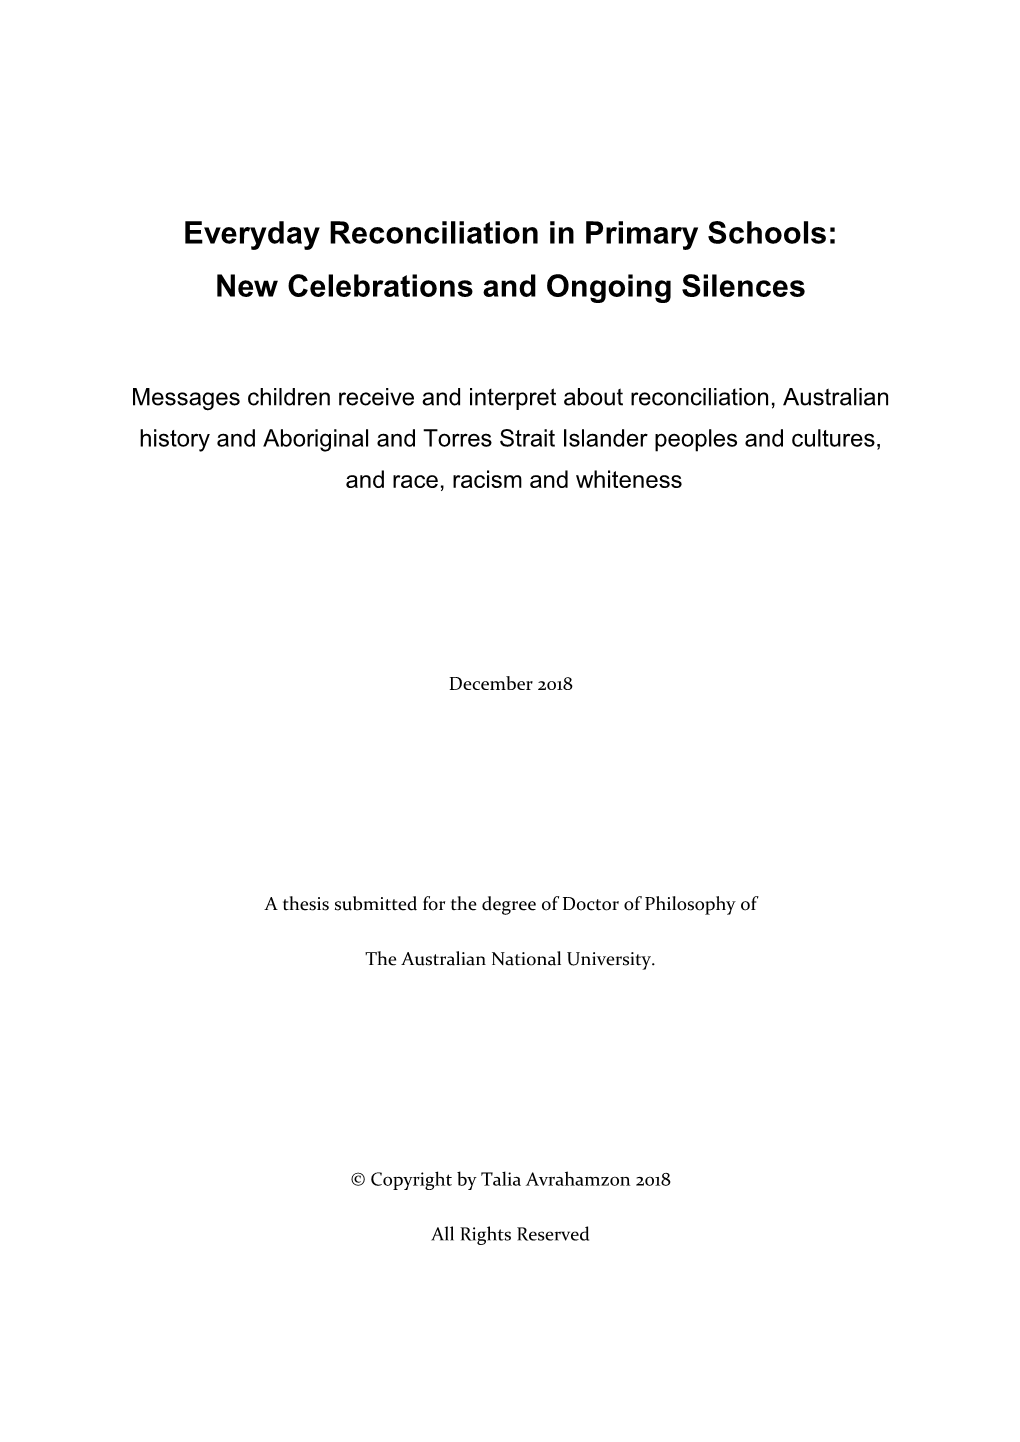 Everyday Reconciliation in Primary Schools: New Celebrations and Ongoing Silences